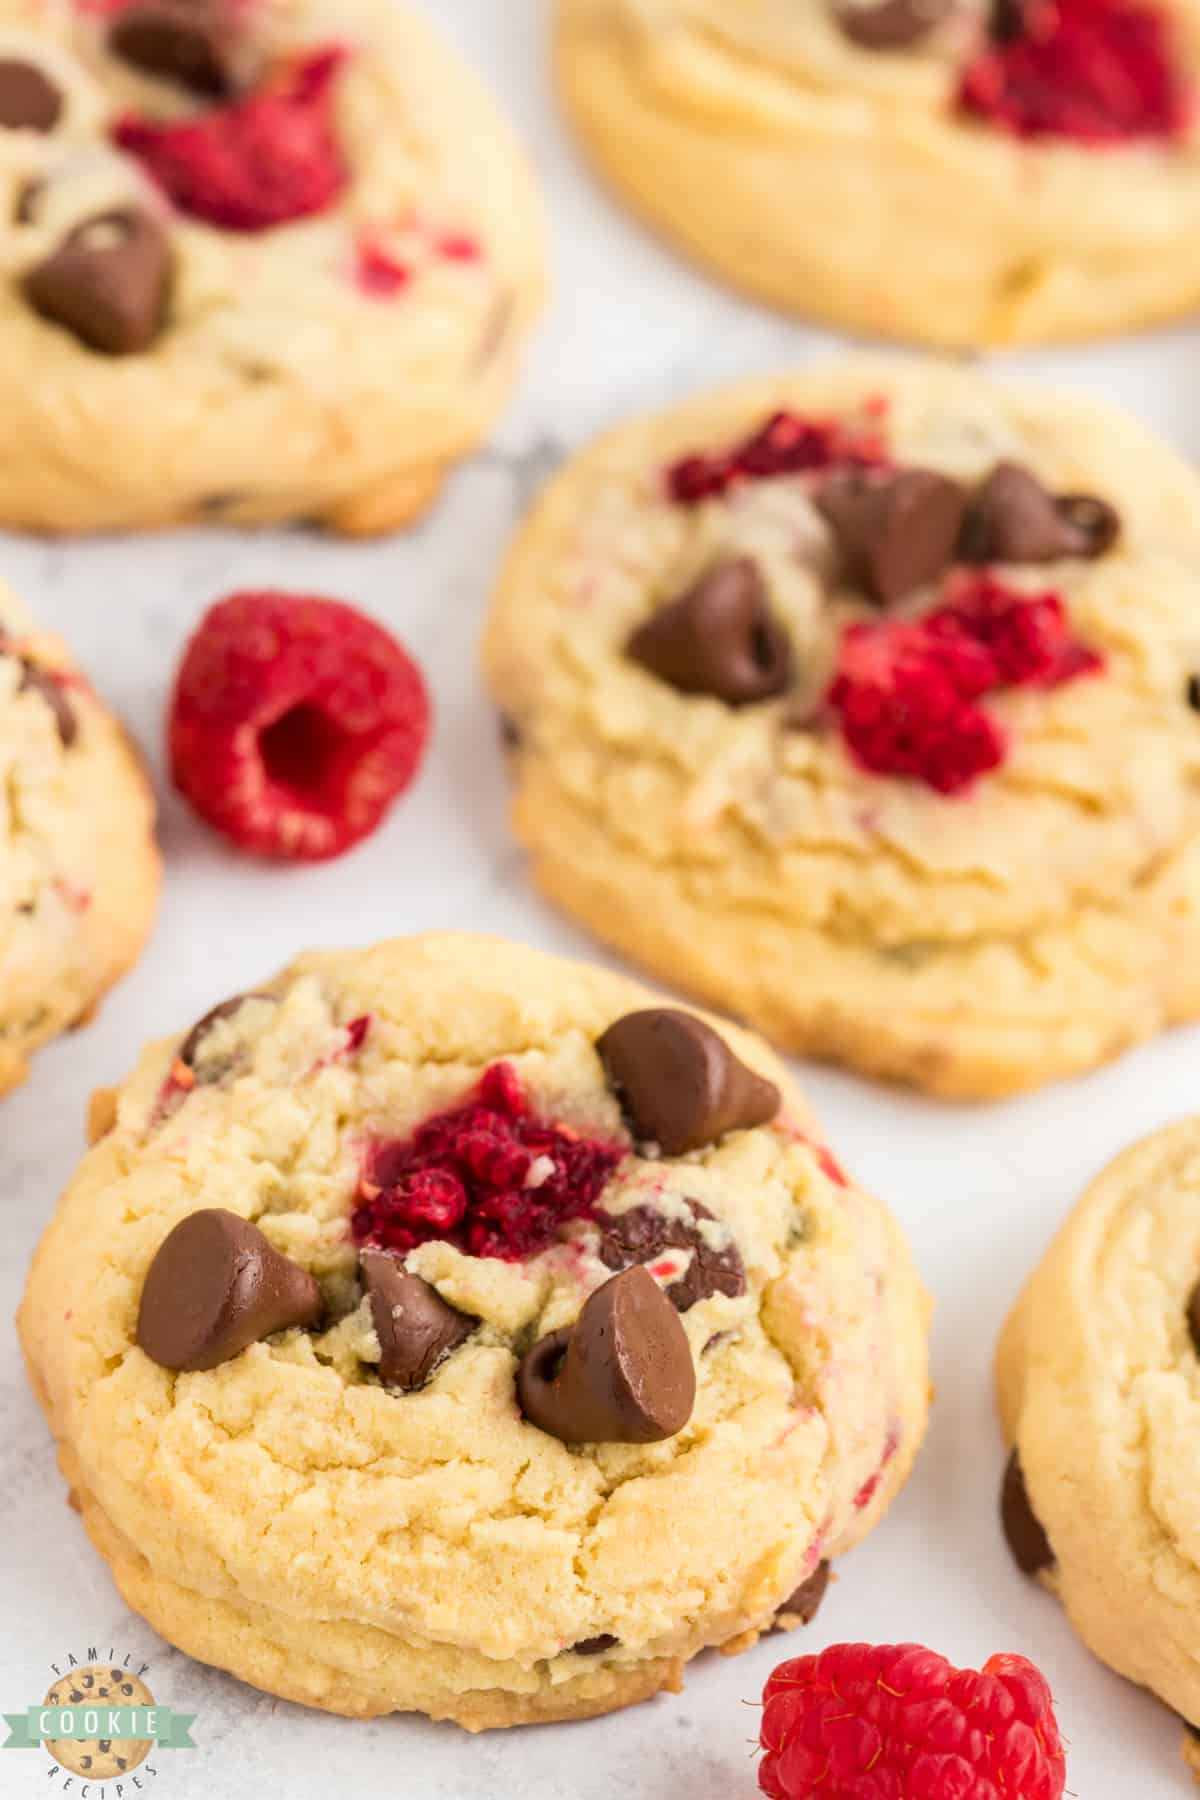 Cookie recipe with chocolate and raspberries